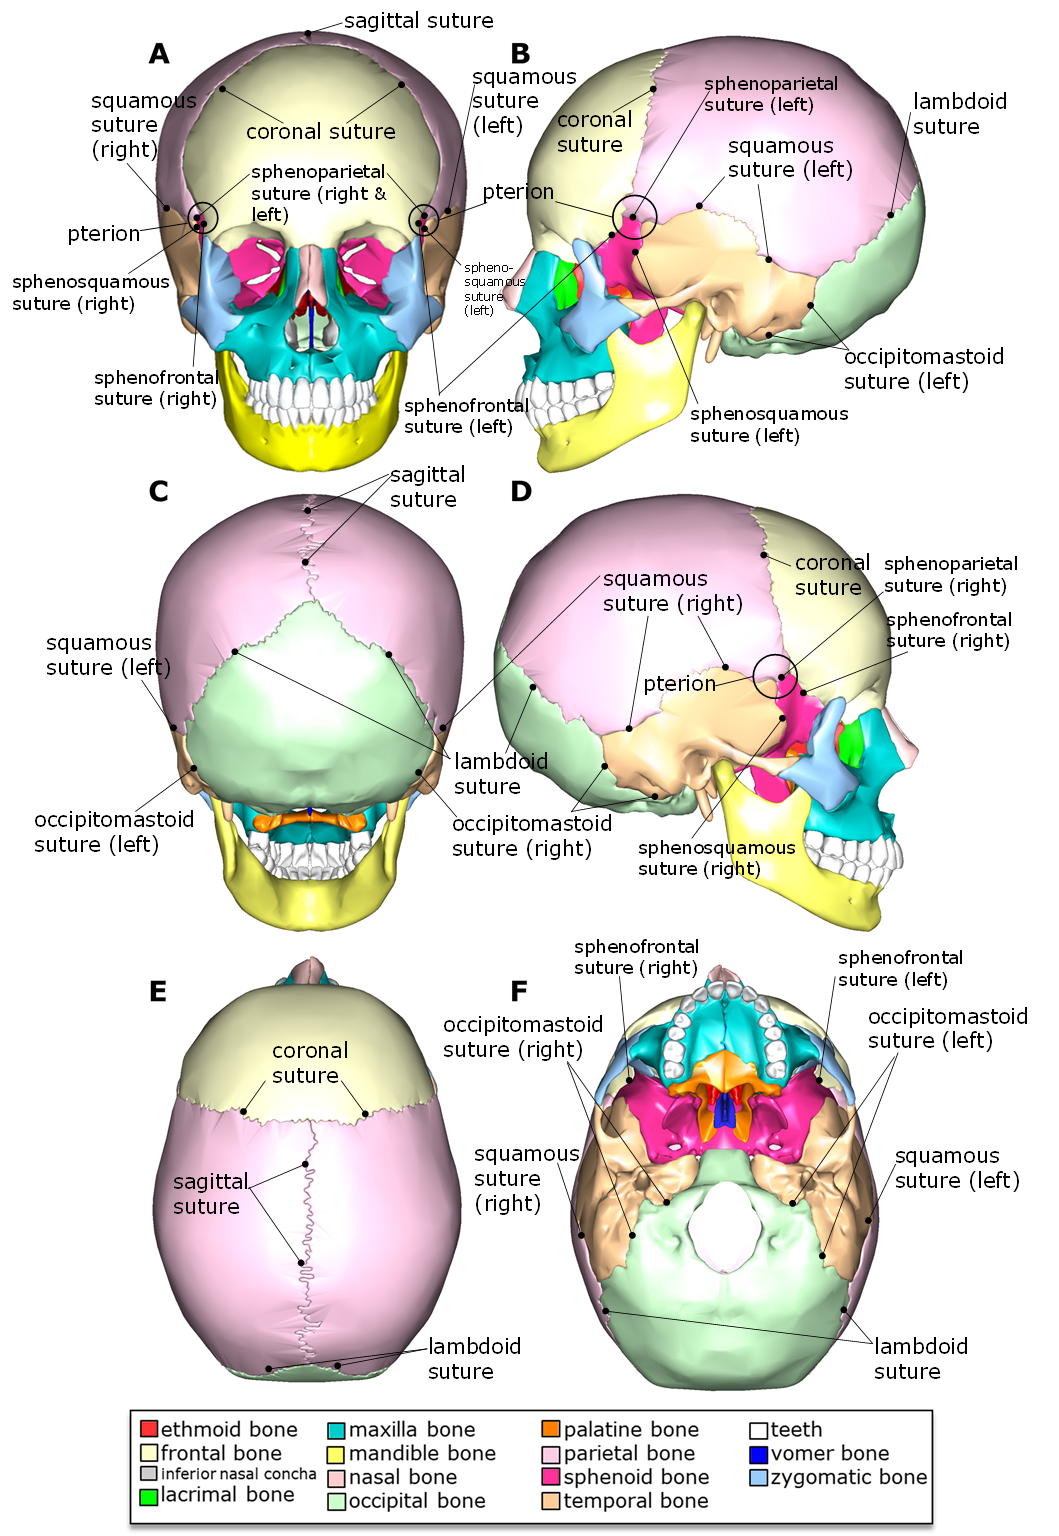 The Skull: Names of Bones in the Head, with Anatomy, & Labeled Diagram